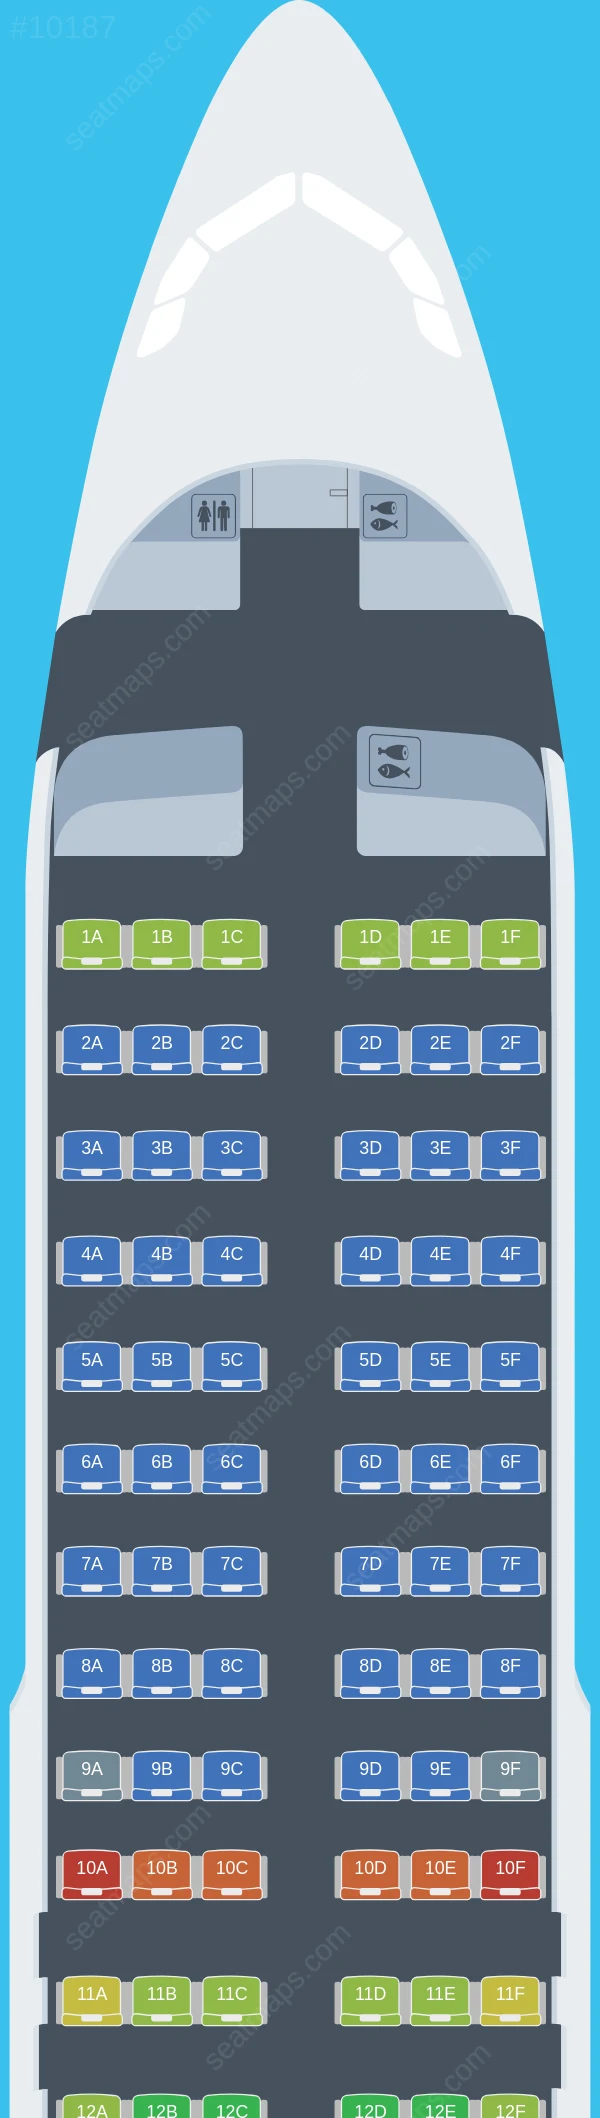 Swiss Airbus A320neo seatmap preview